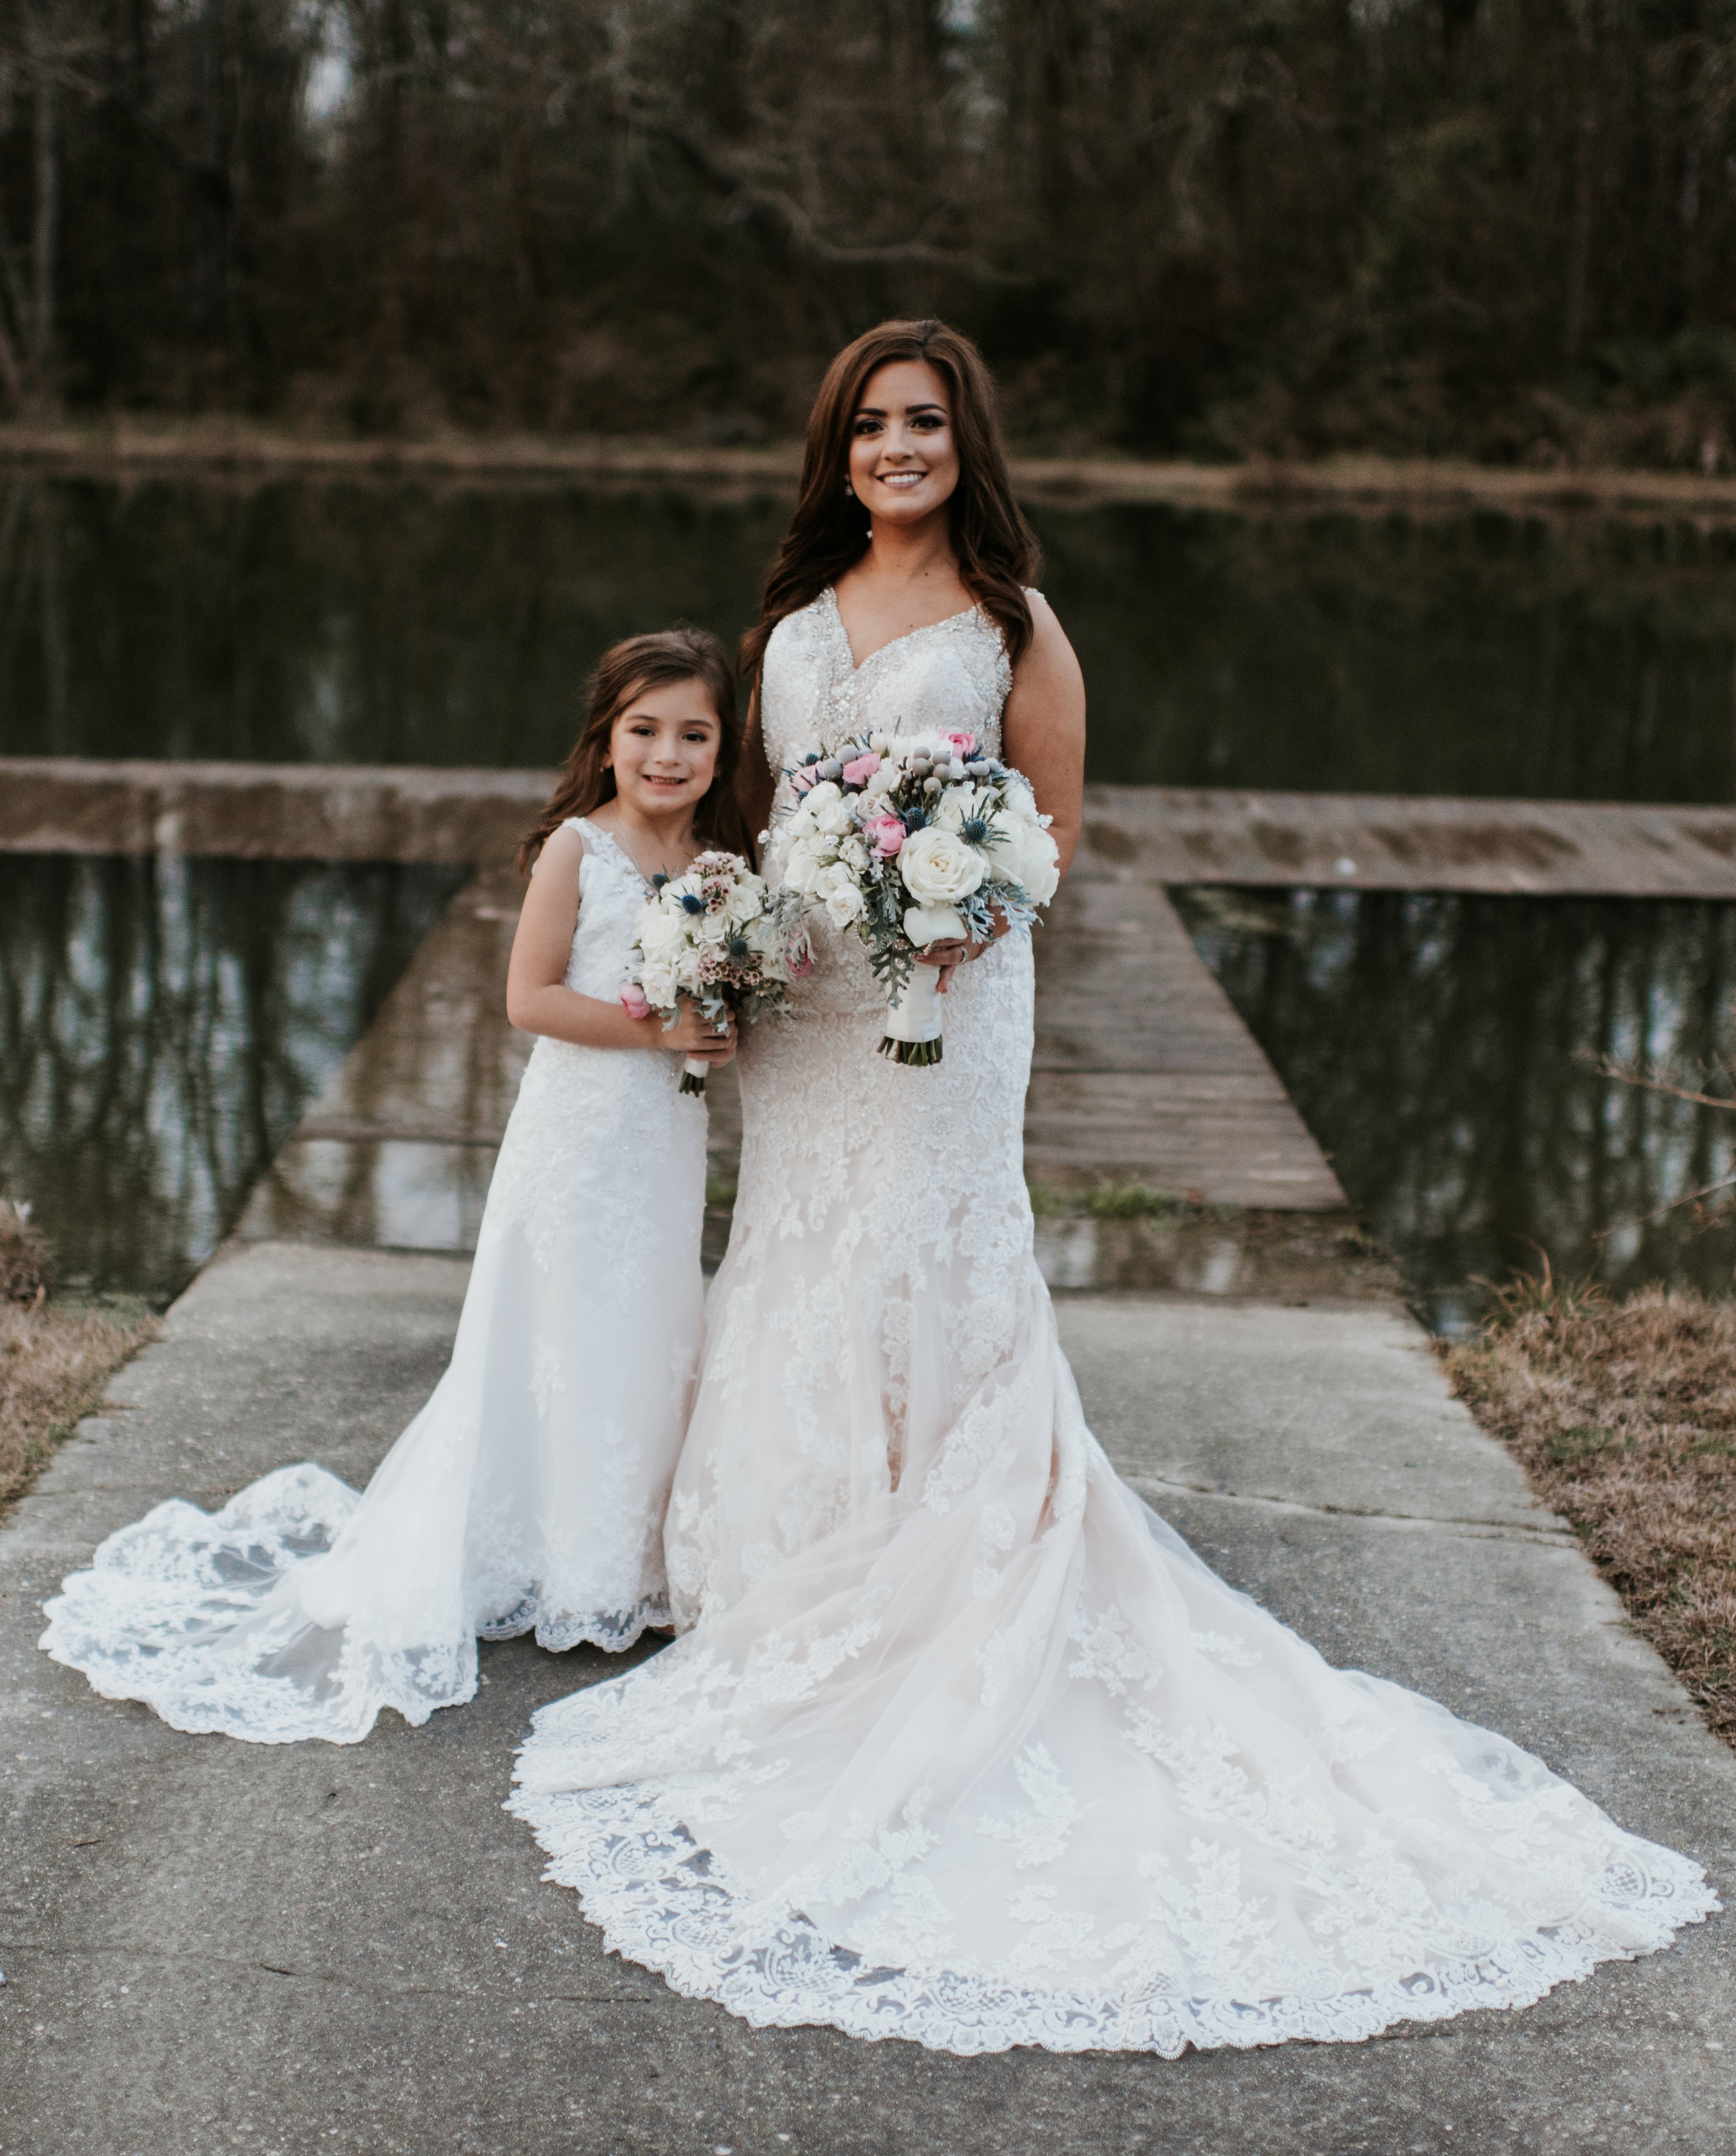 Matching Flower Girl Dresses to Bridal Gowns 